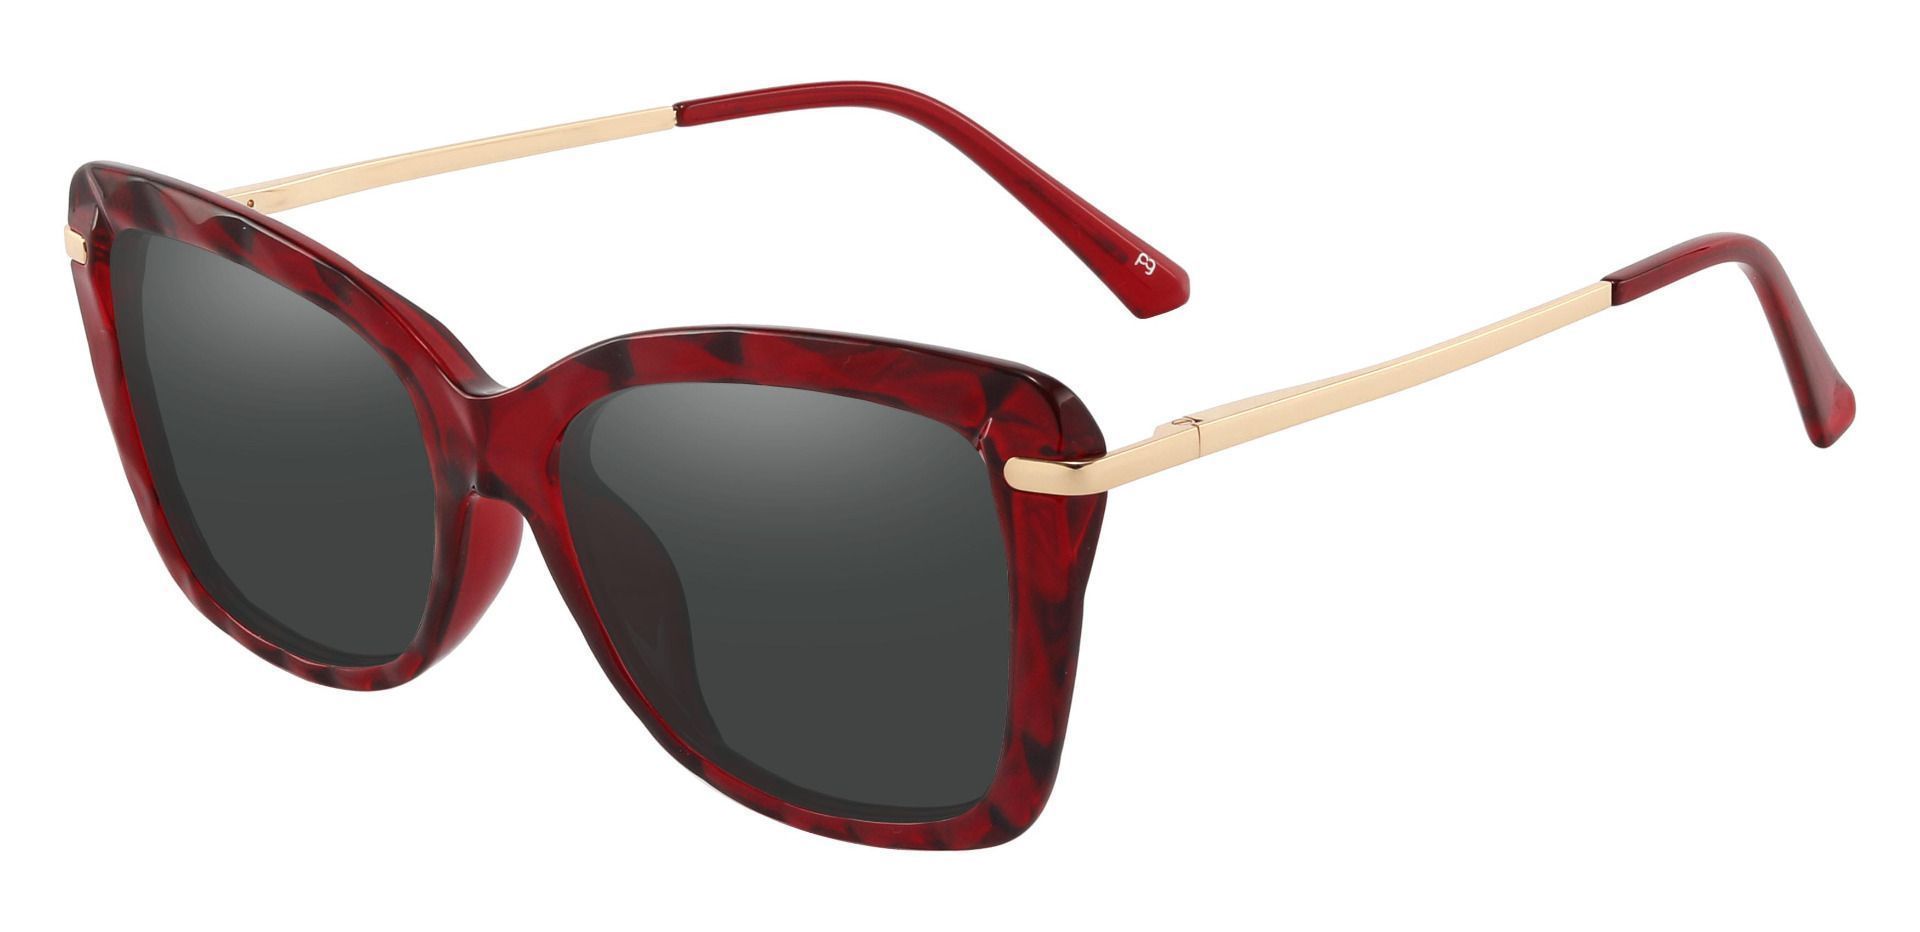 Shoshanna Rectangle Reading Sunglasses - Red Frame With Gray Lenses